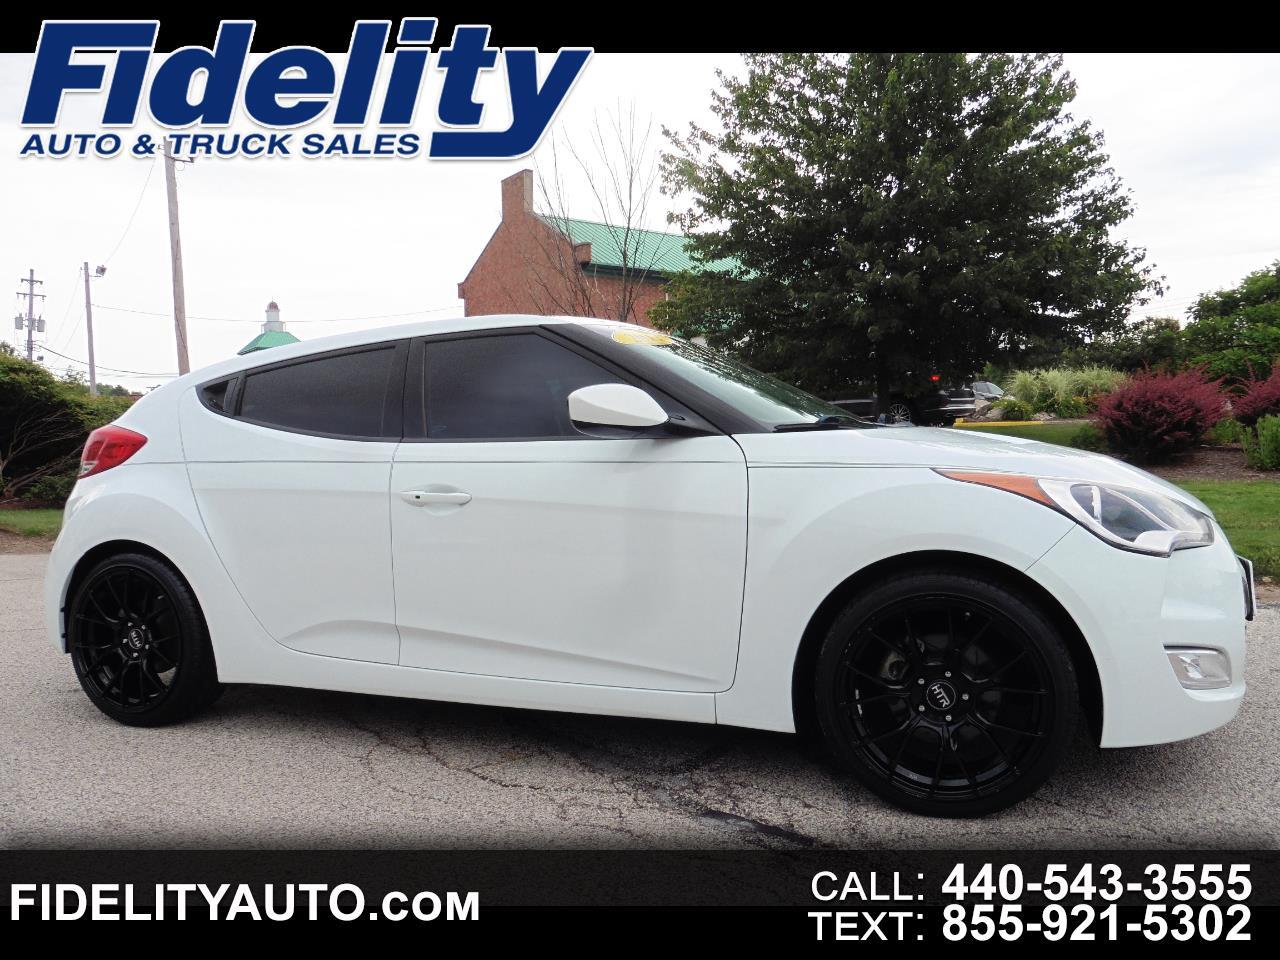 2012 Hyundai Veloster 3dr Cpe Auto w/Red Int